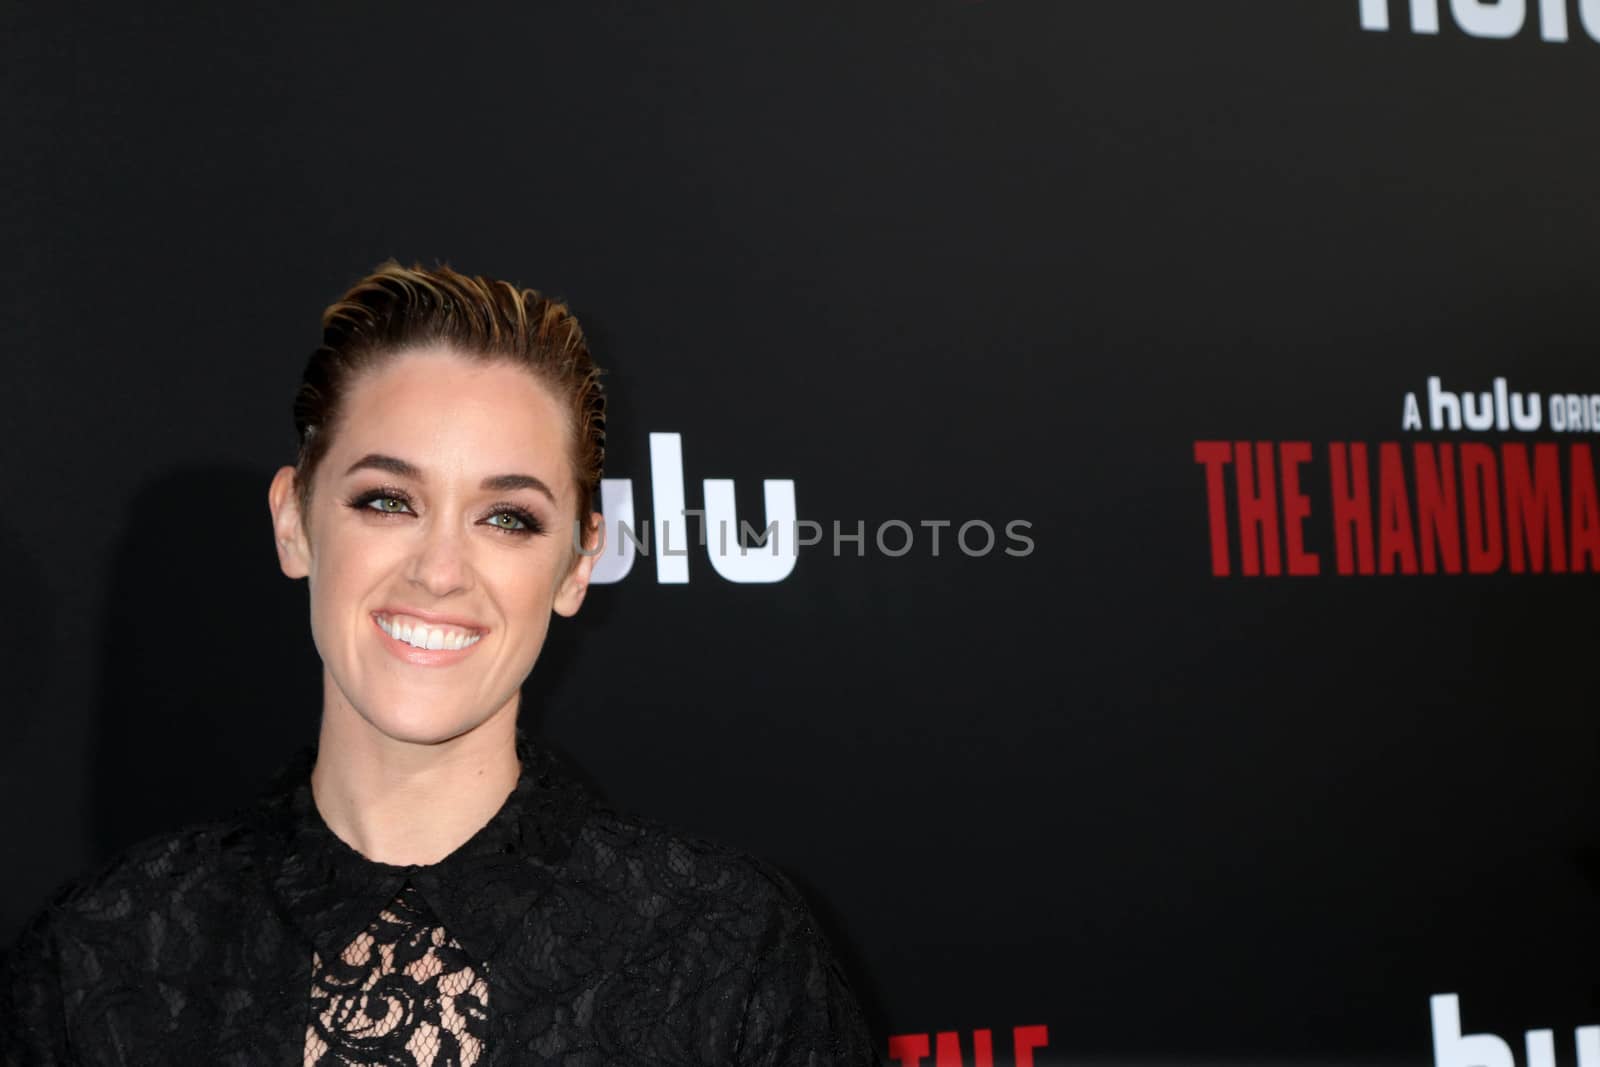 Lauren Morelli
at the Premiere Of Hulu's "The Handmaid's Tale," Cinerama Dome, Hollywood, CA 04-25-17/ImageCollect by ImageCollect